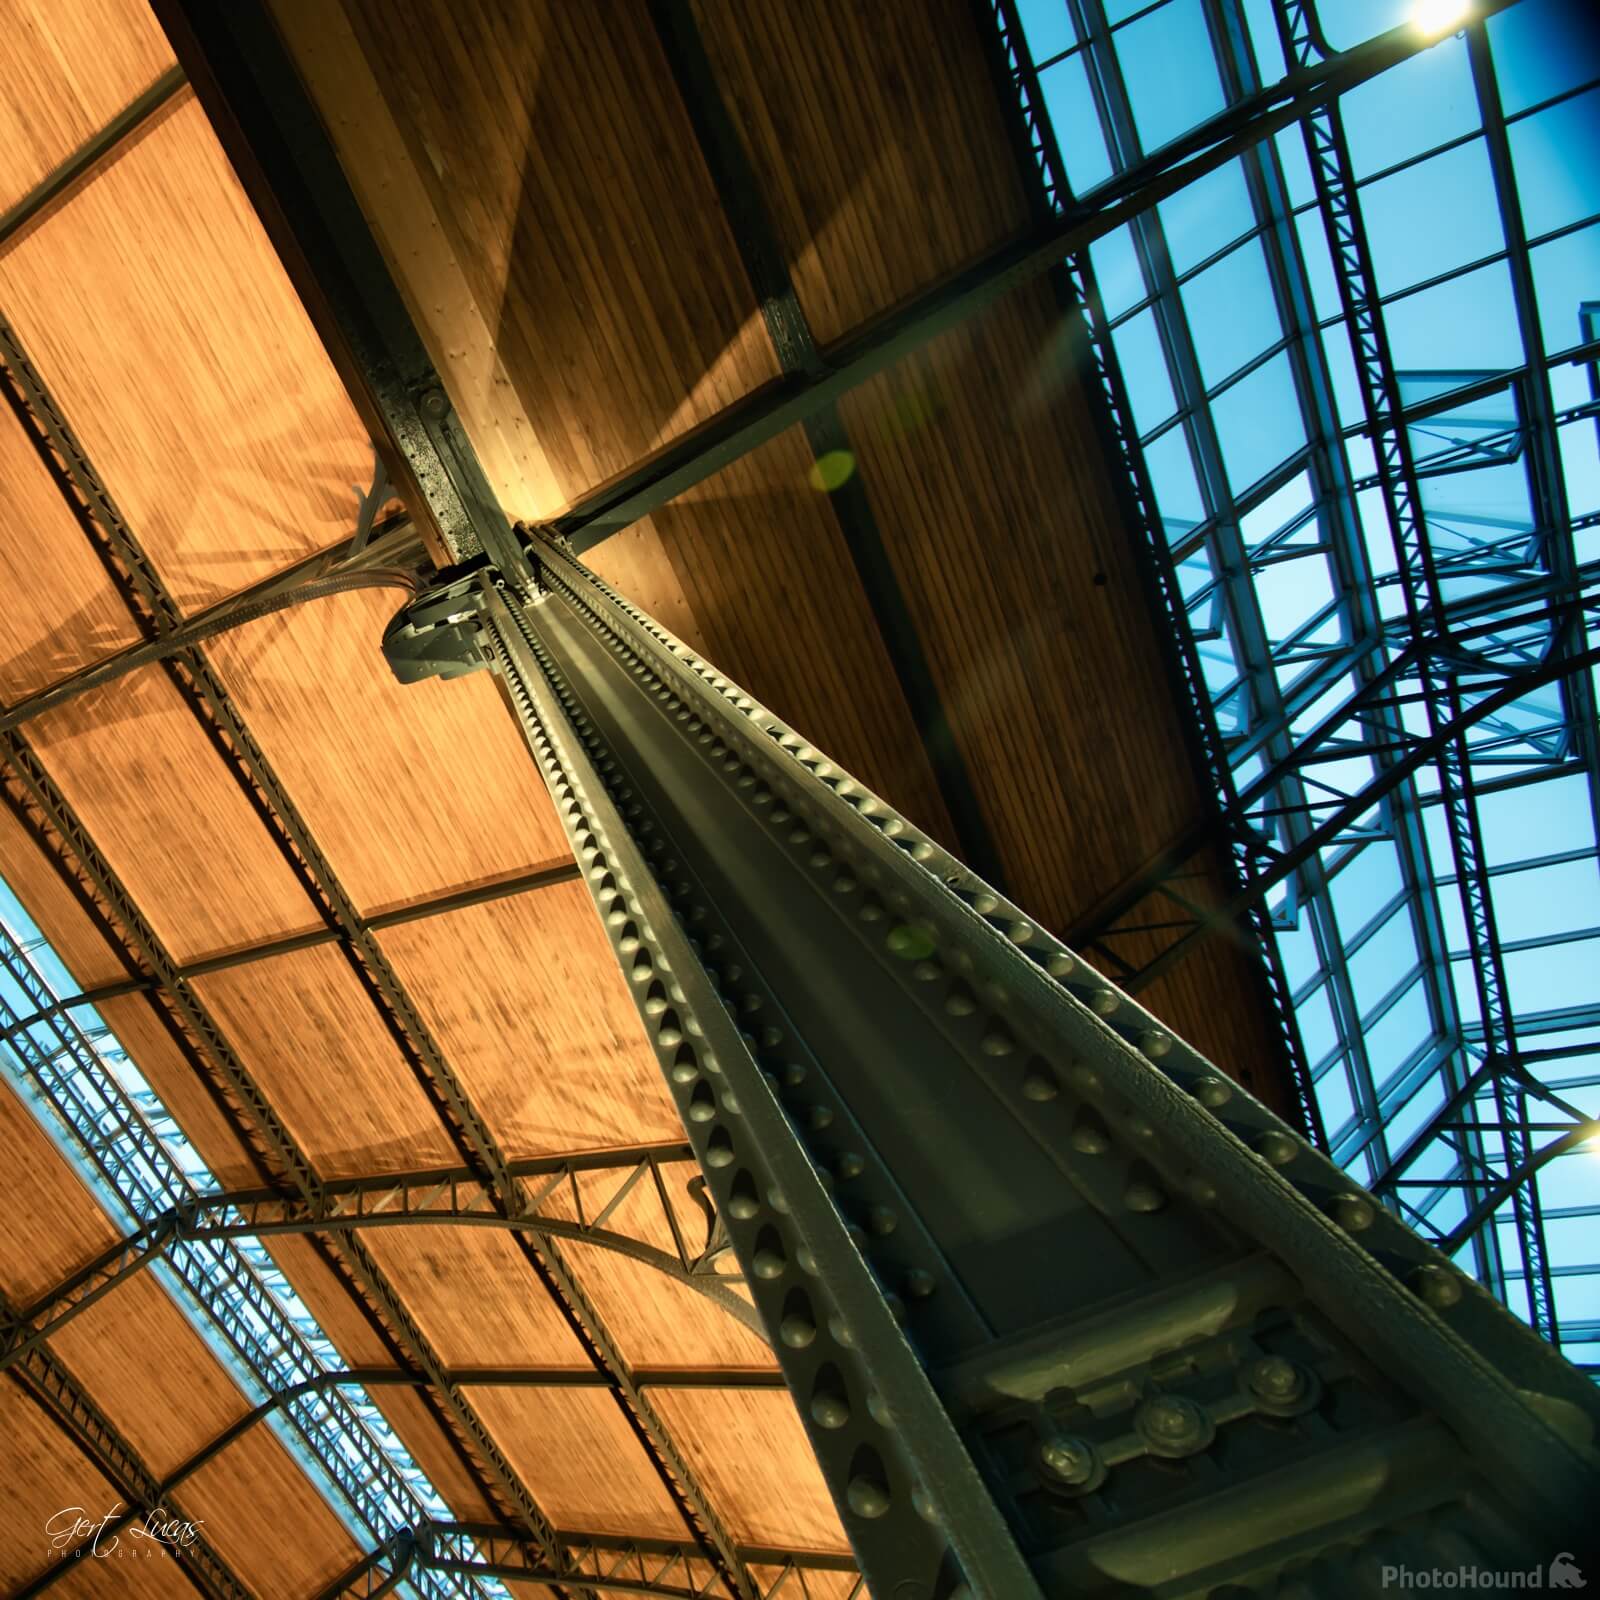 Image of Gare Maritime (Interior) by Gert Lucas